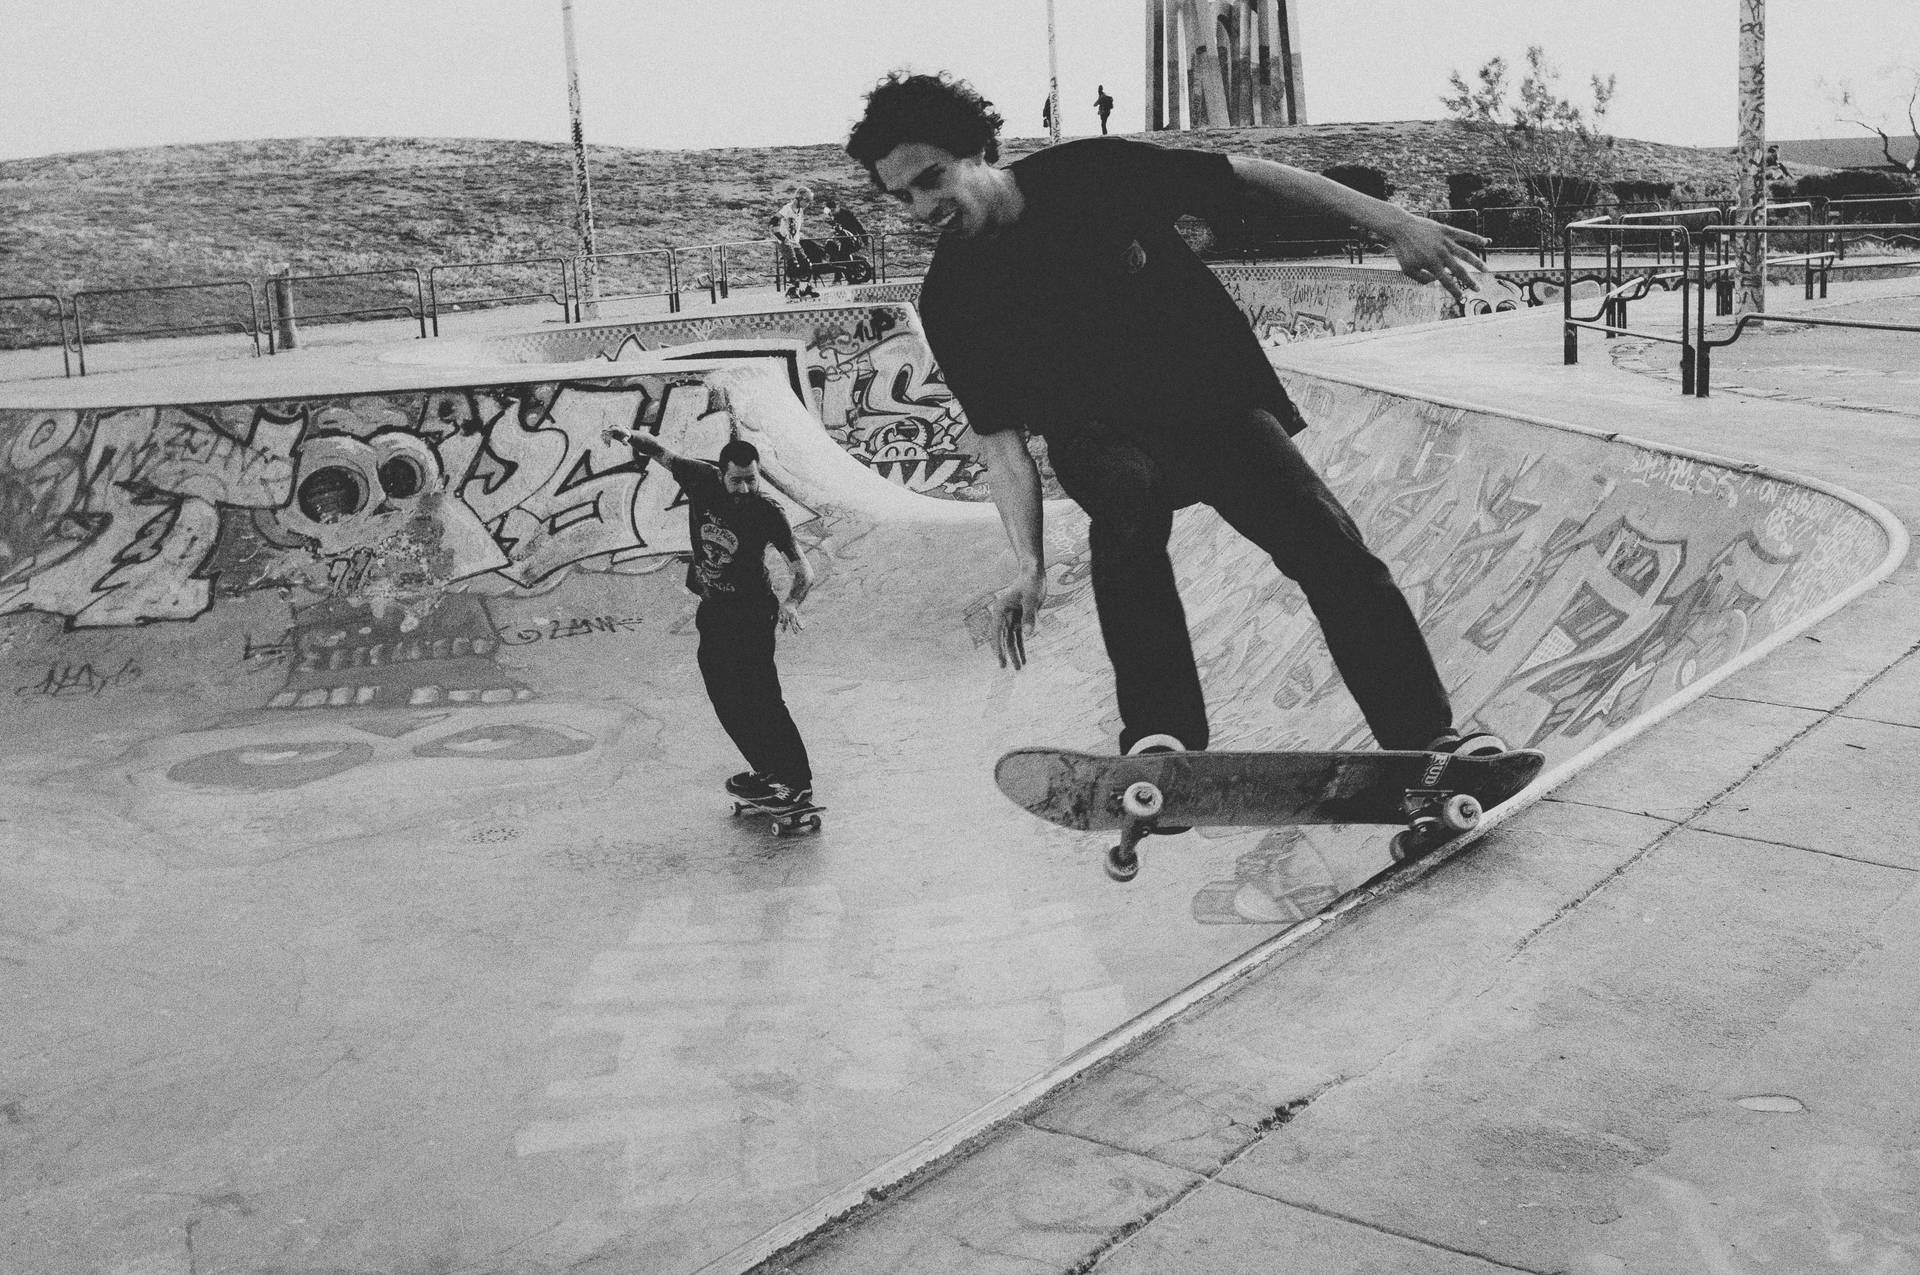 A couple of friends skateboarding together in black and white Wallpaper